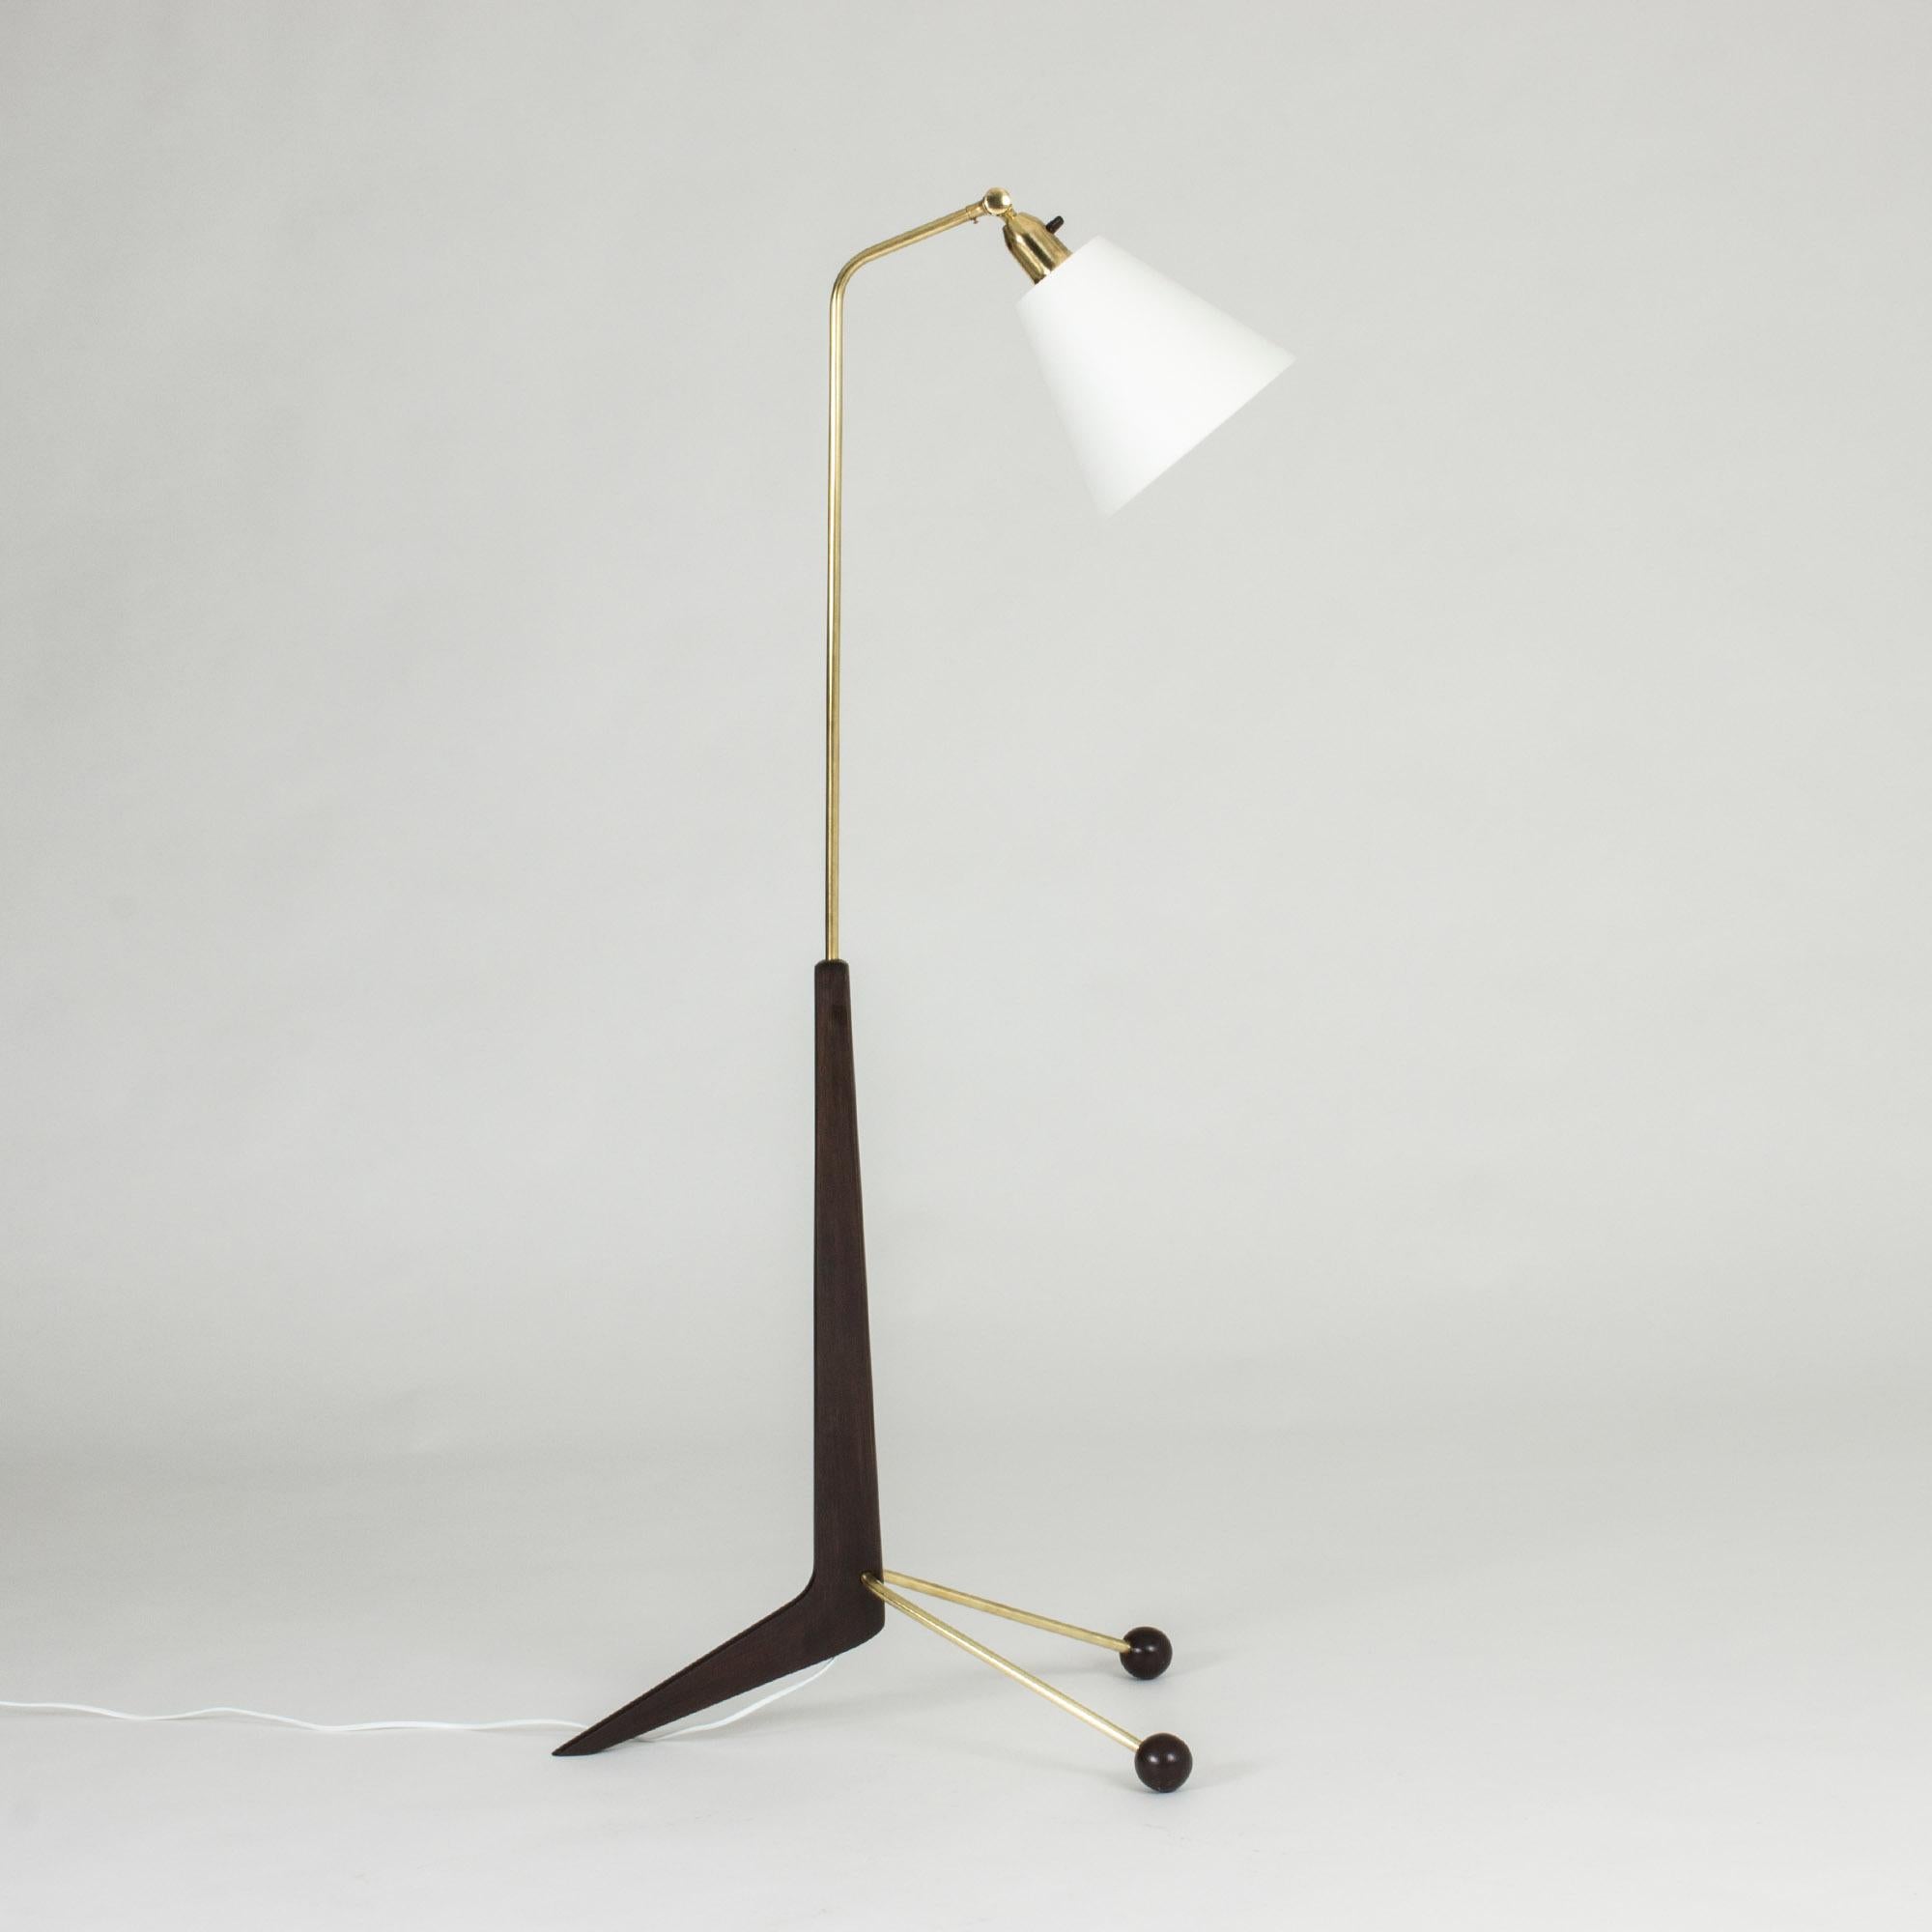 Cool Swedish 1950s floor lamp, made from brass and lacquered wood in a graphic shape. Cool u-shaped base with wooden balls at the ends.